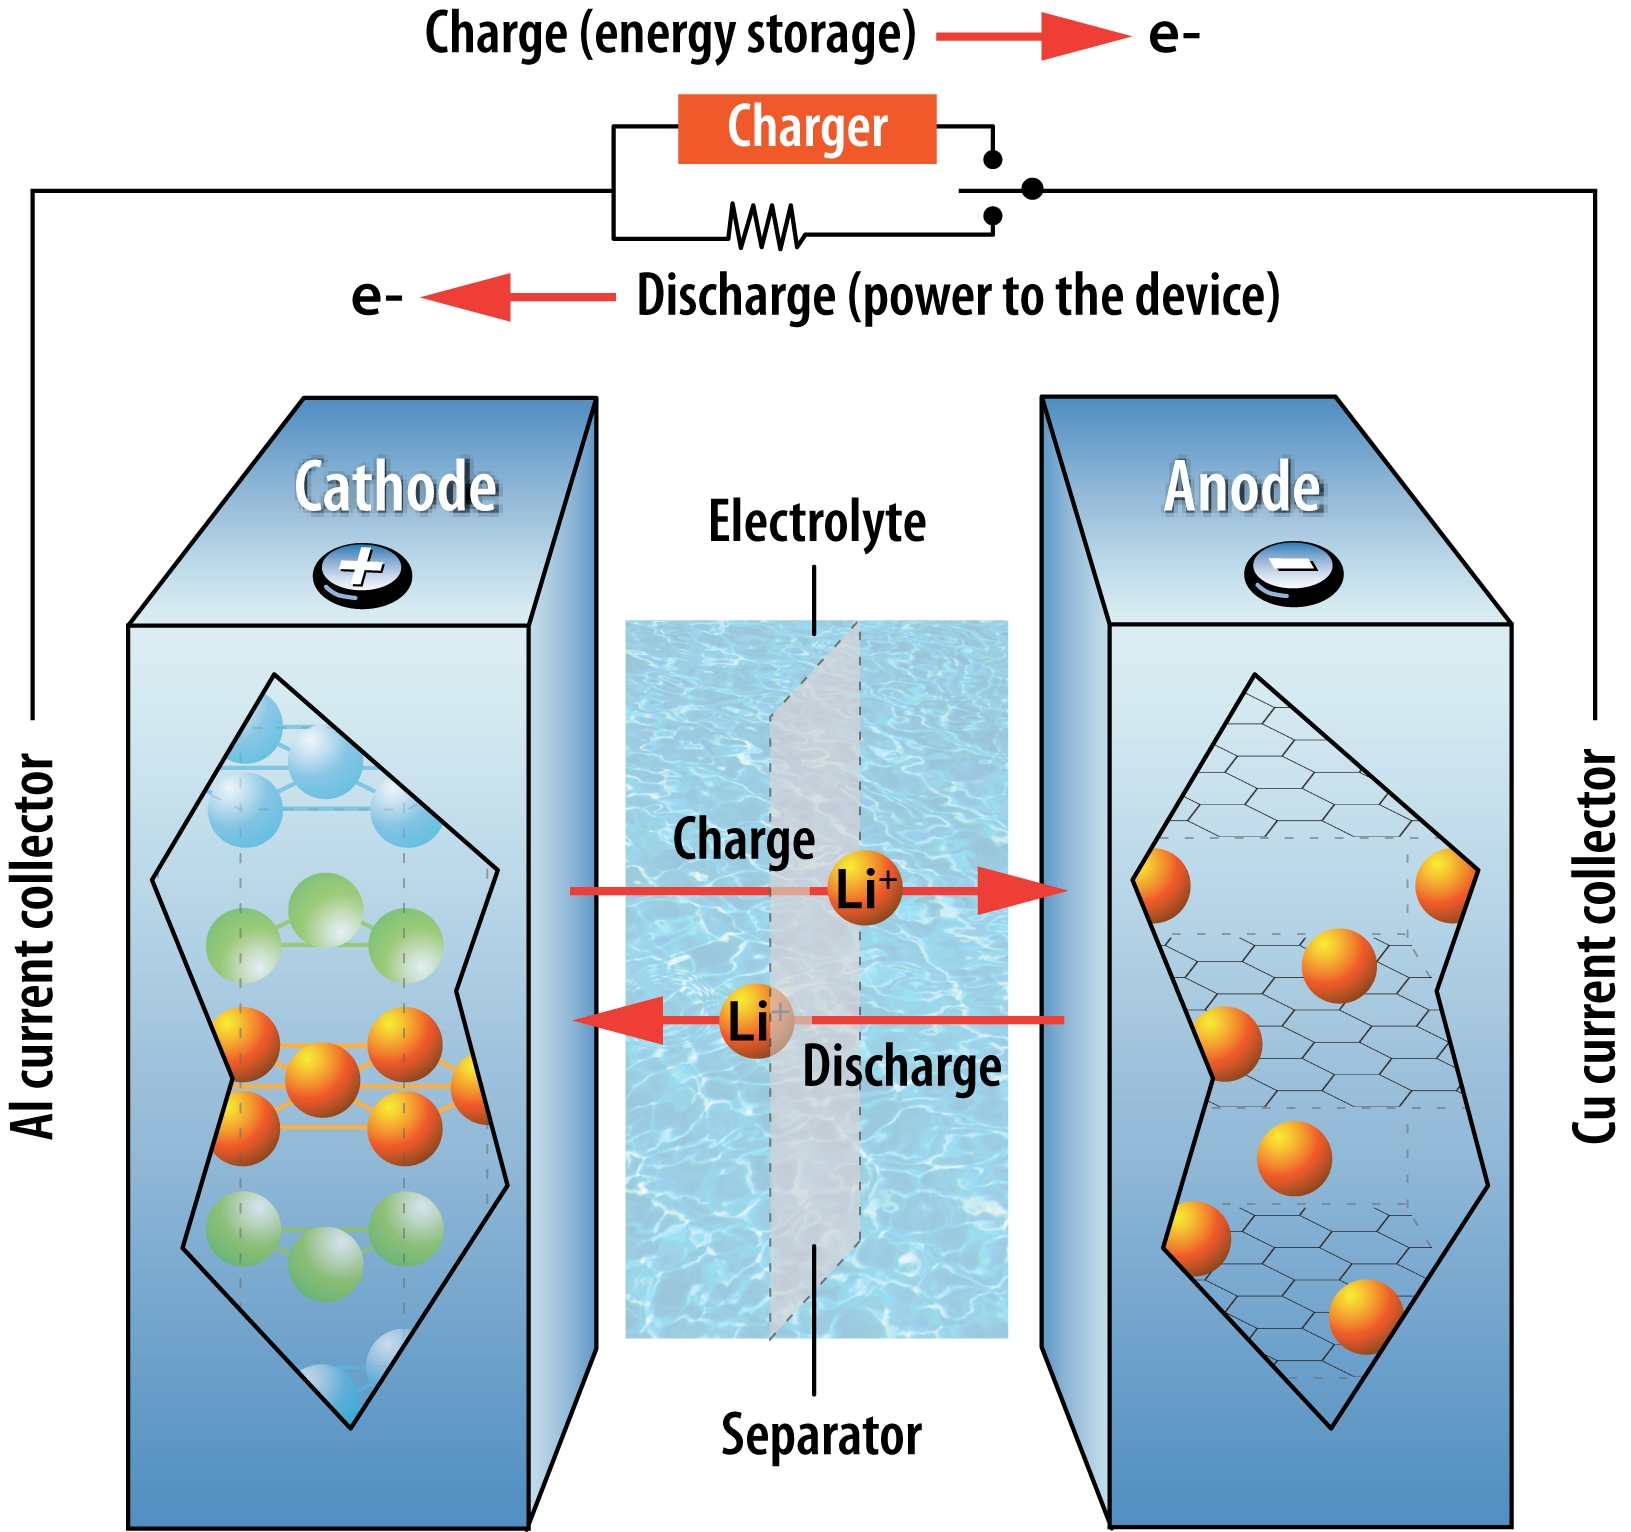 Five emerging battery technologies for electric vehicles